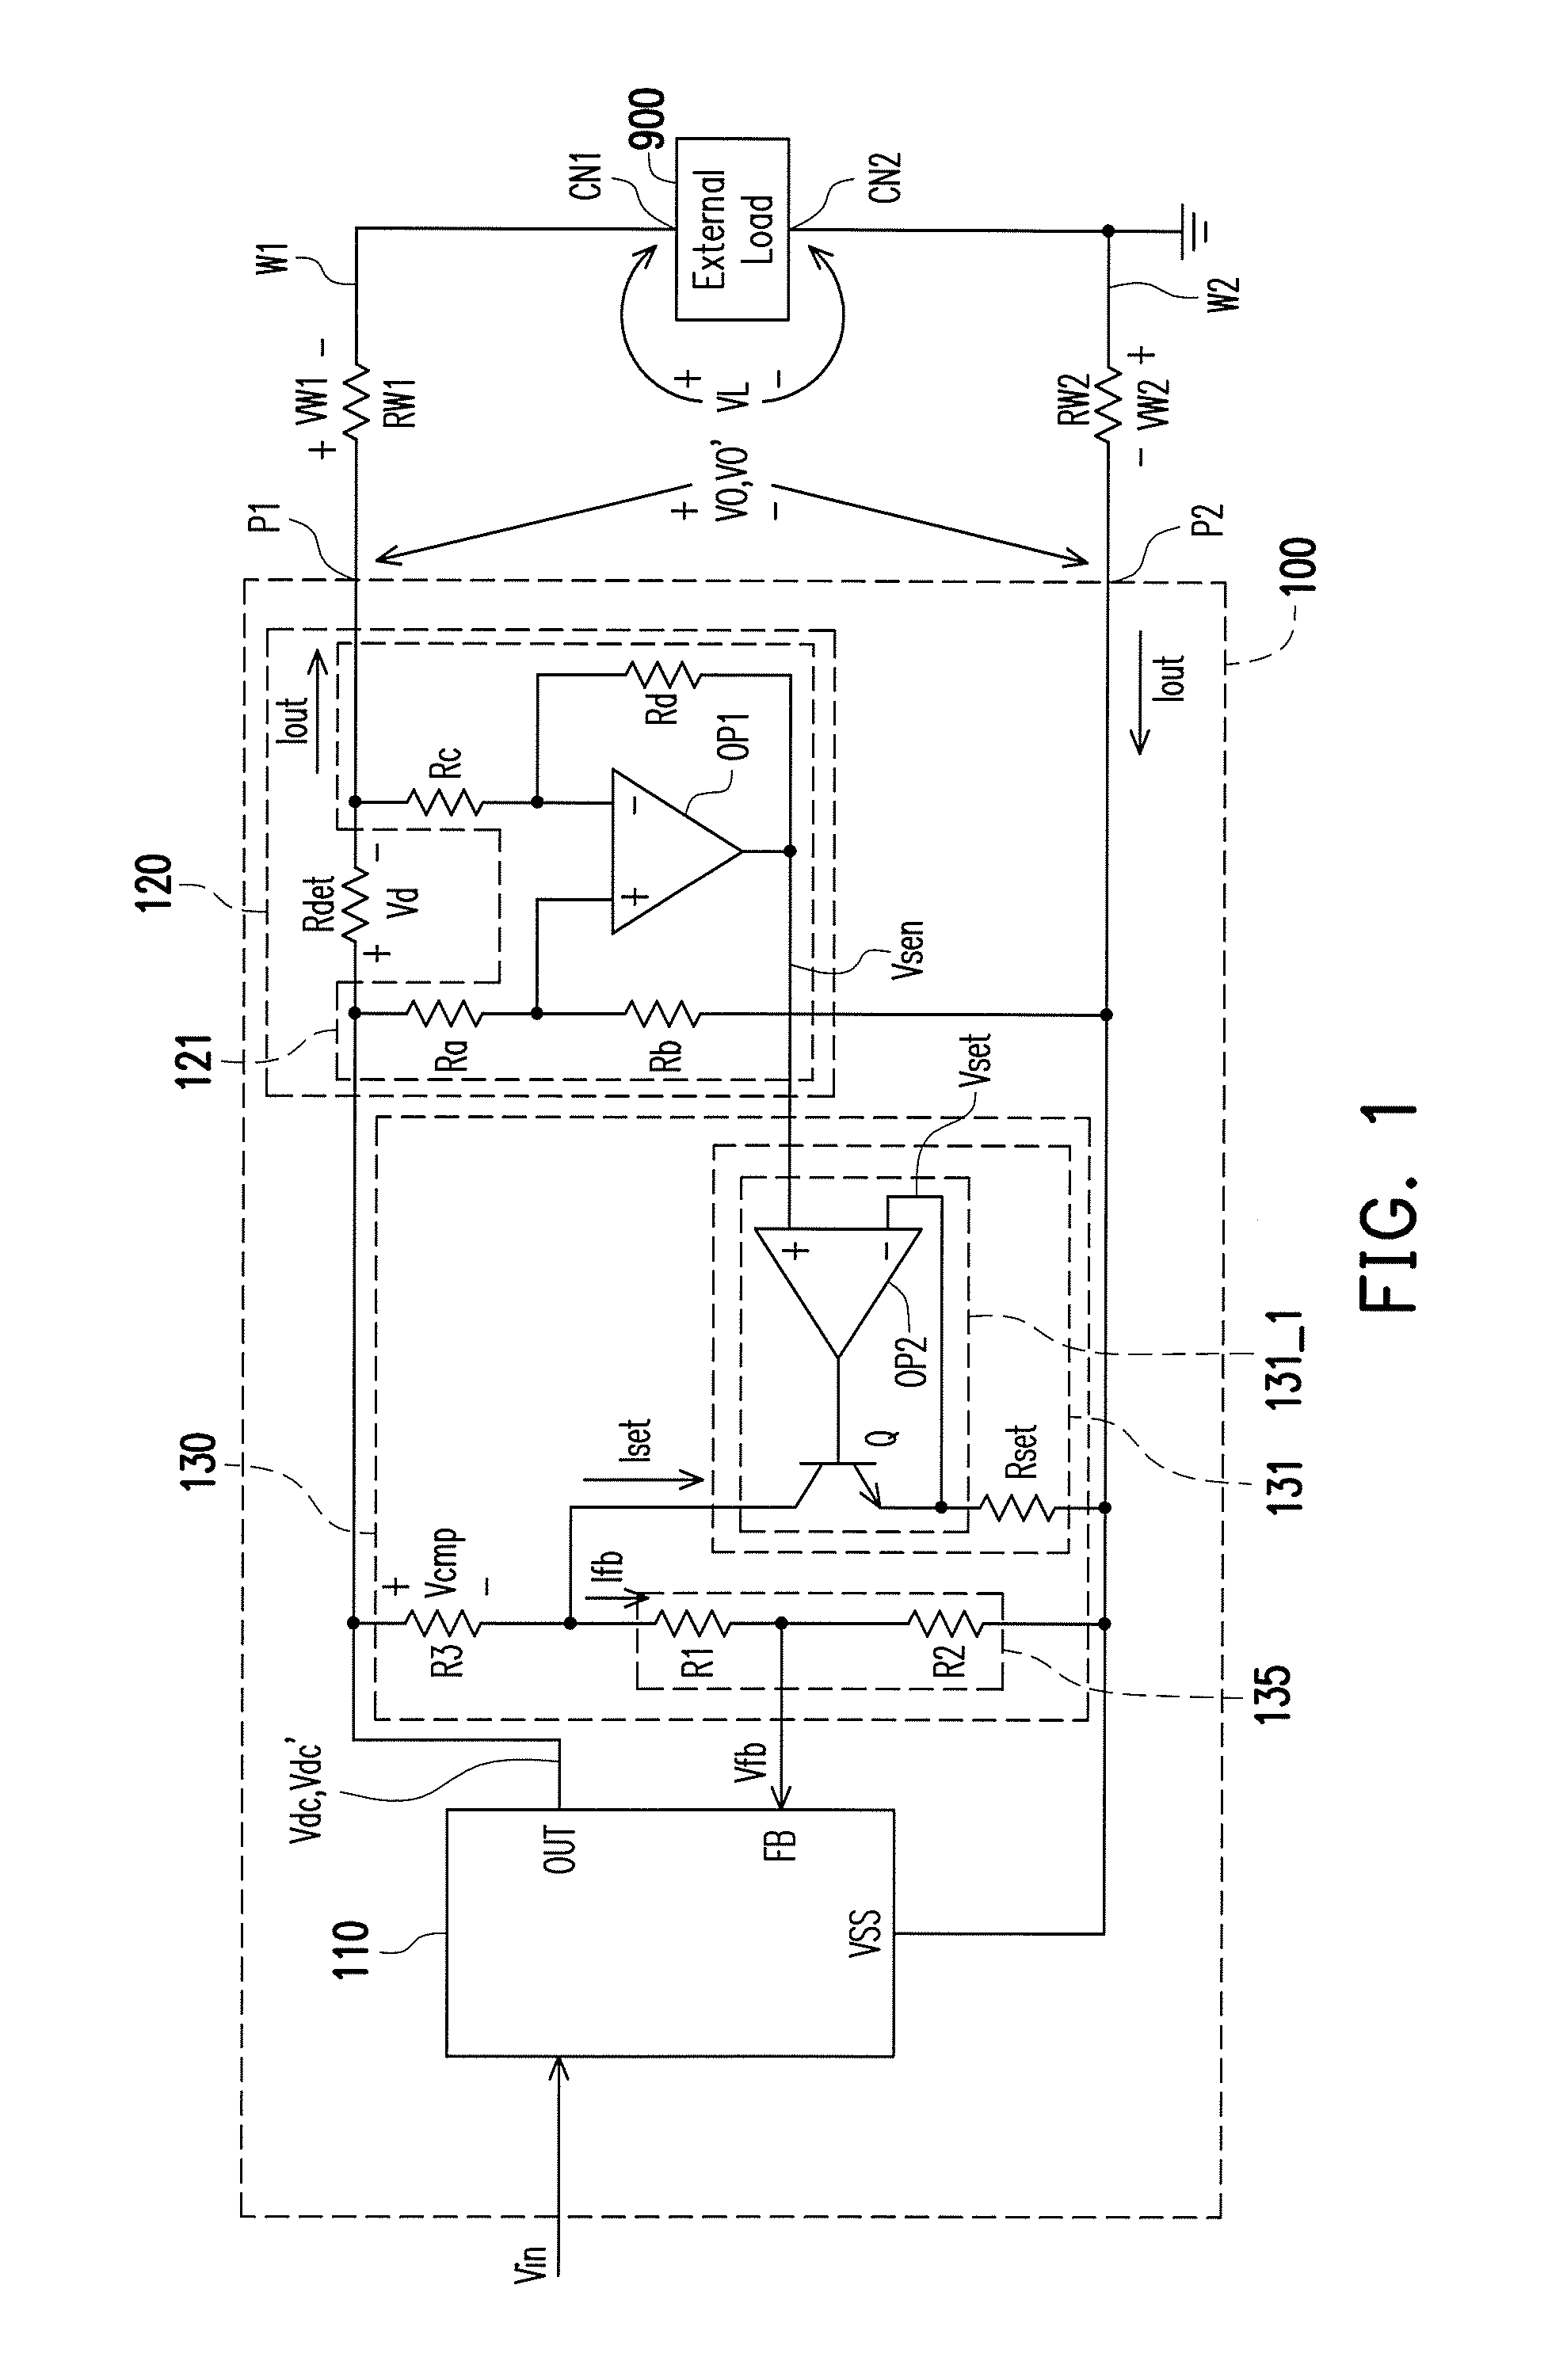 Power supply apparatus with cable voltage drop compensation